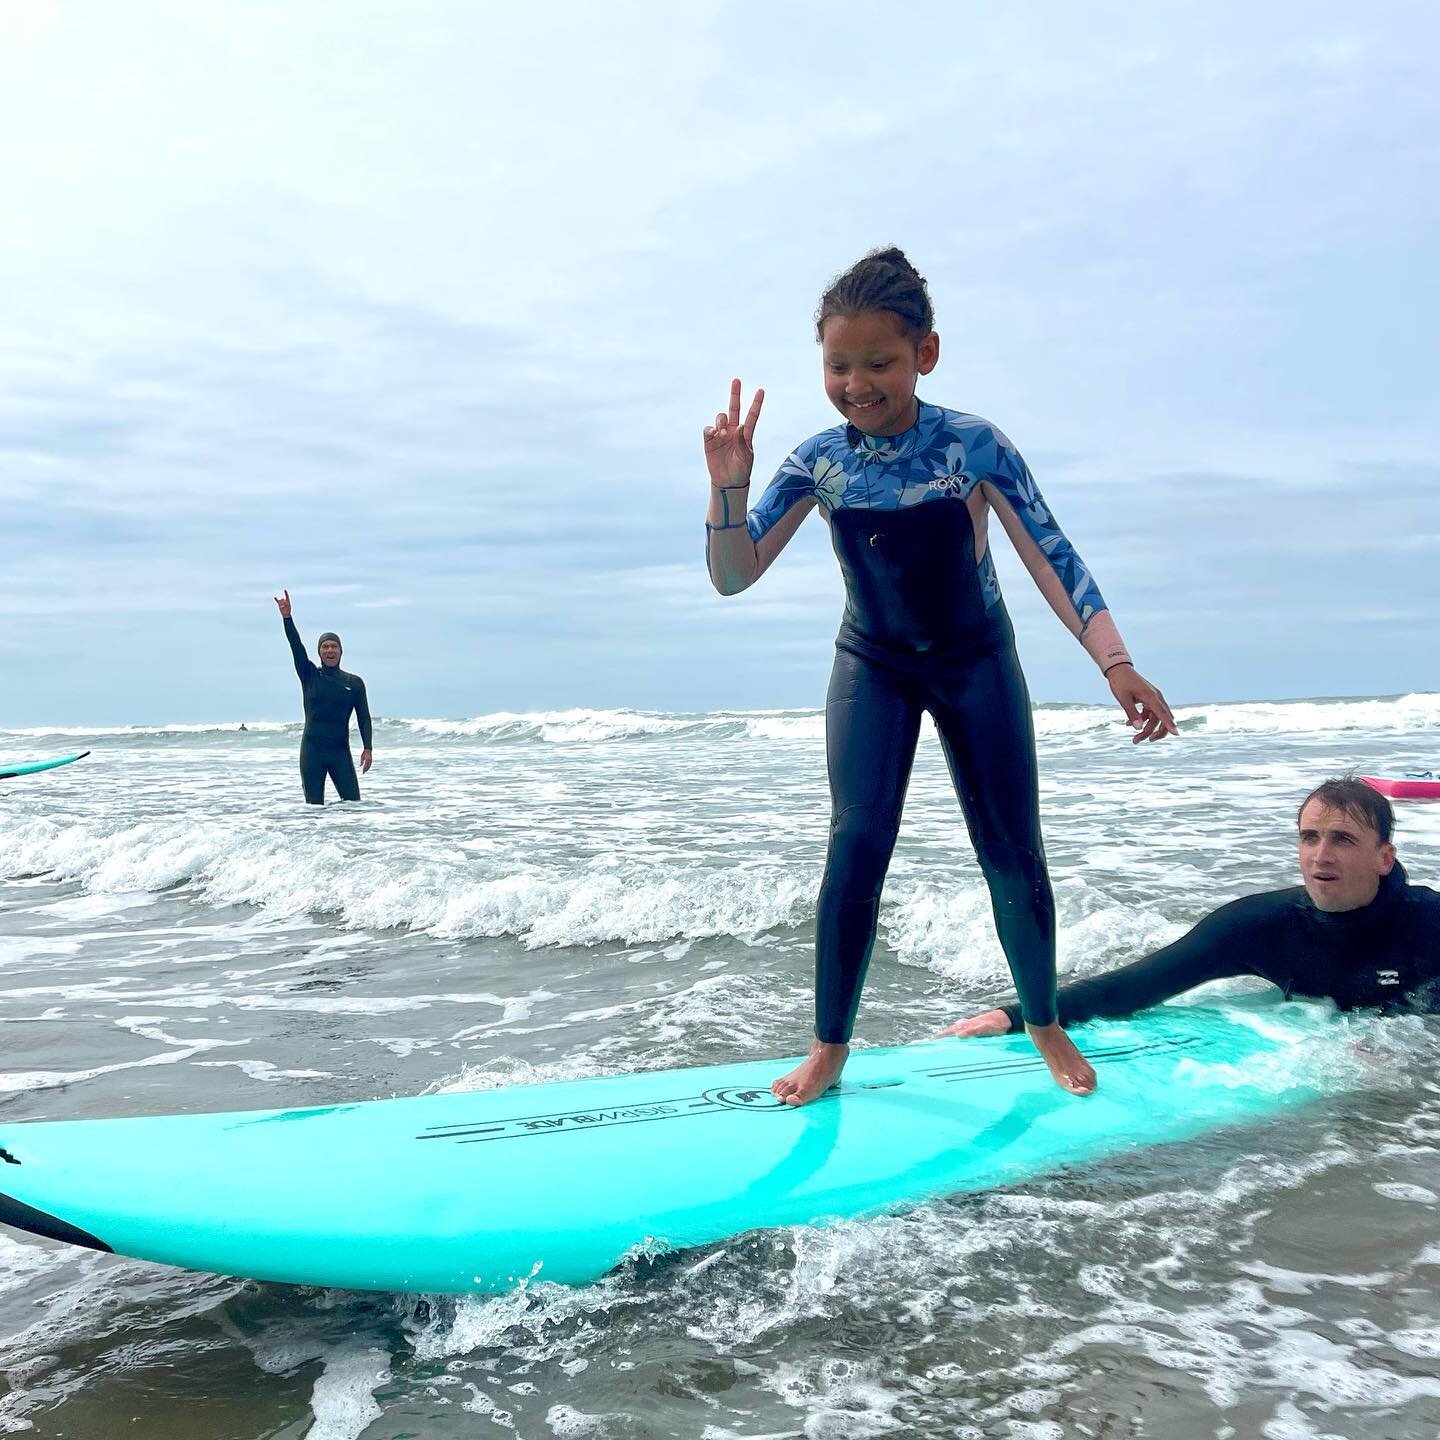 Happy Easter!!! ❤️ We had a really rad day yesterday with @cityofdreamssf and community youth right here at home at Ocean Beach! In all the years of taking @cityofdreamssf youth surfing, we had never taken them out front, and they were so stoked to b